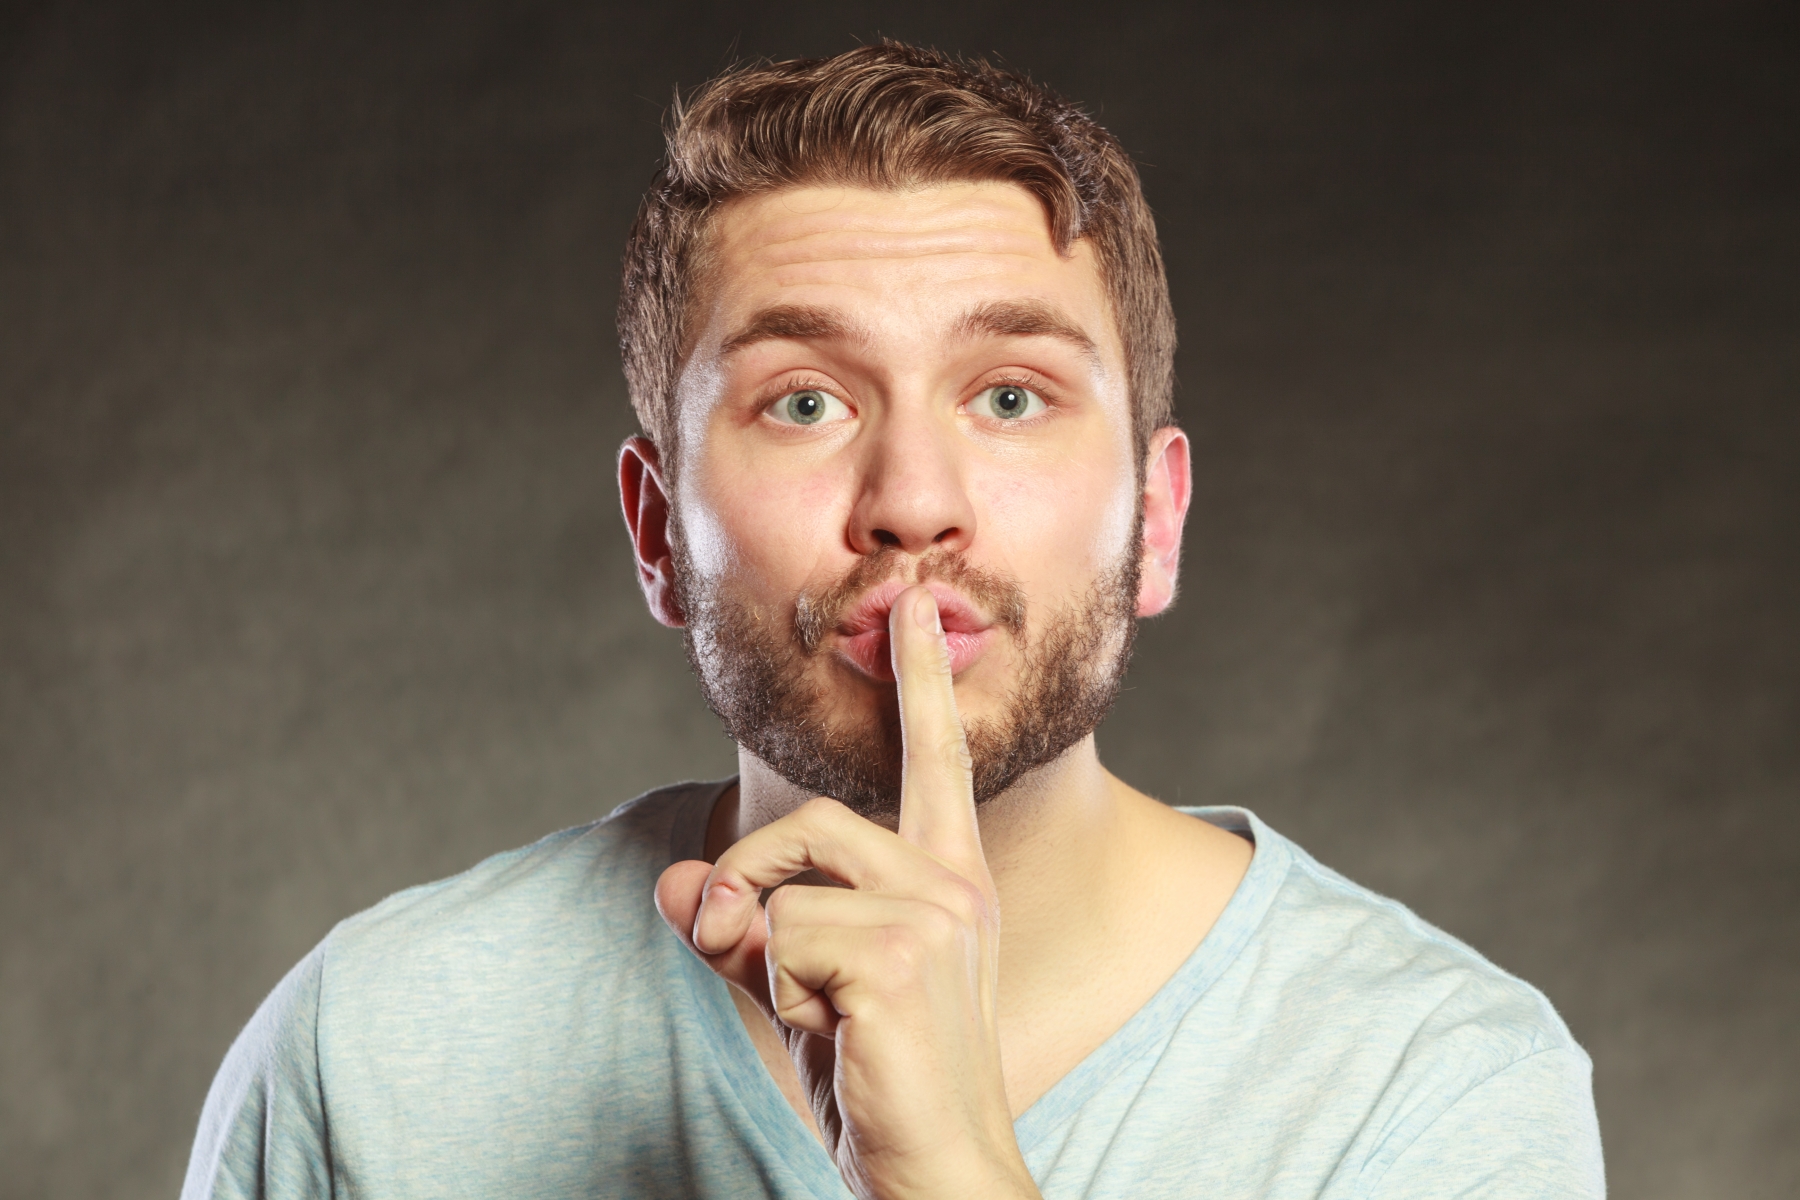 14597483-man-with-finger-on-lips-showing-silence-gesture